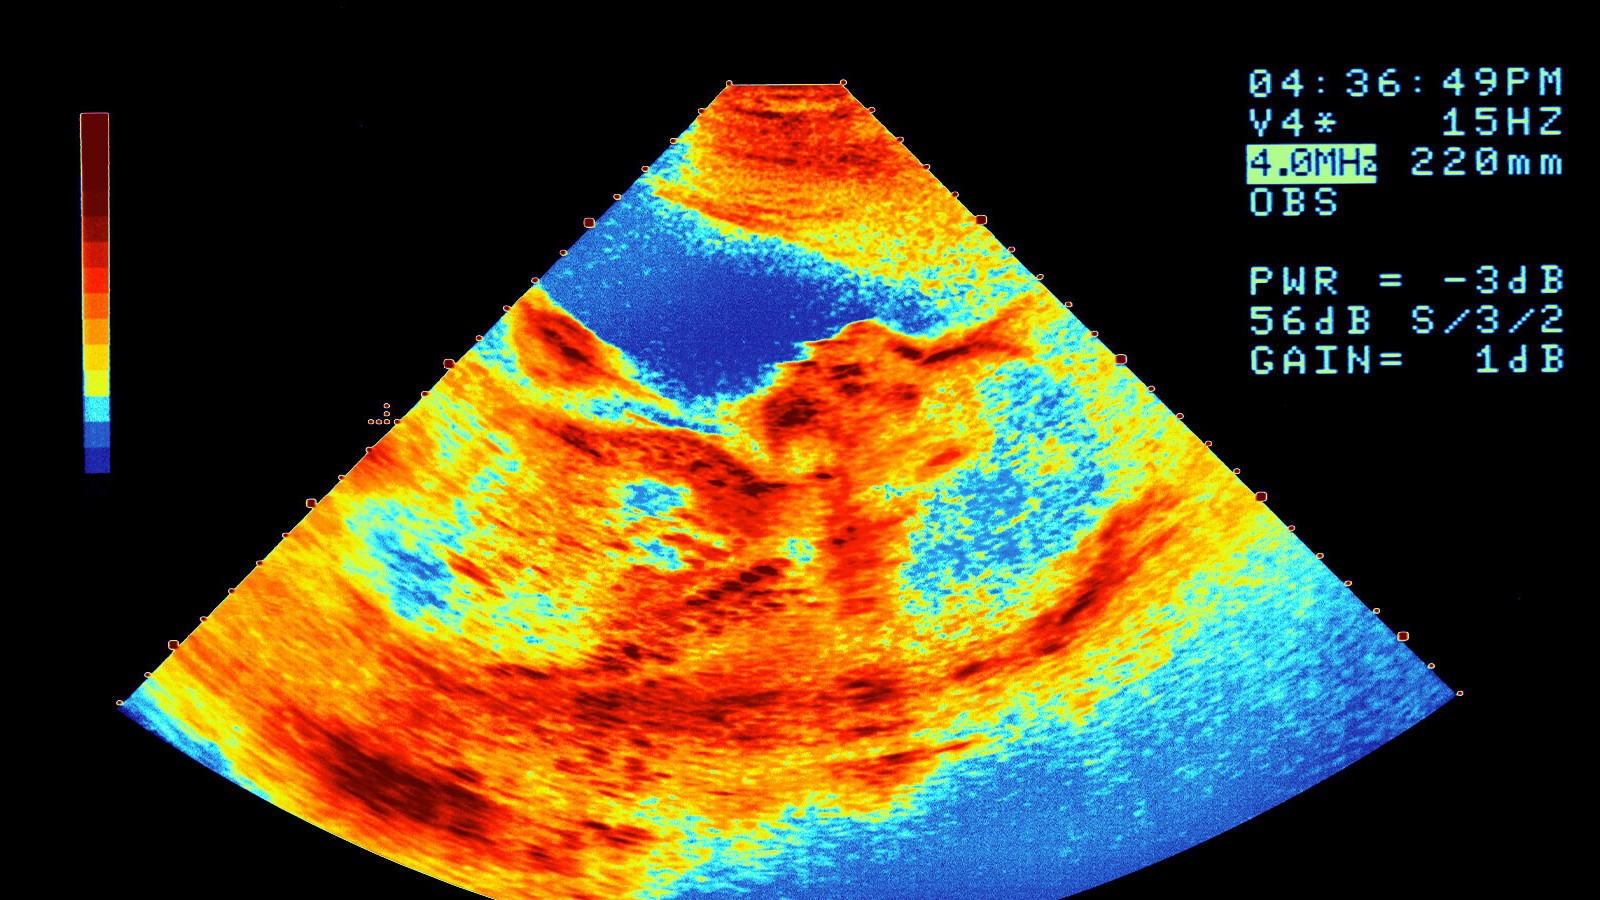 An image of an ultrasound showing heat levels